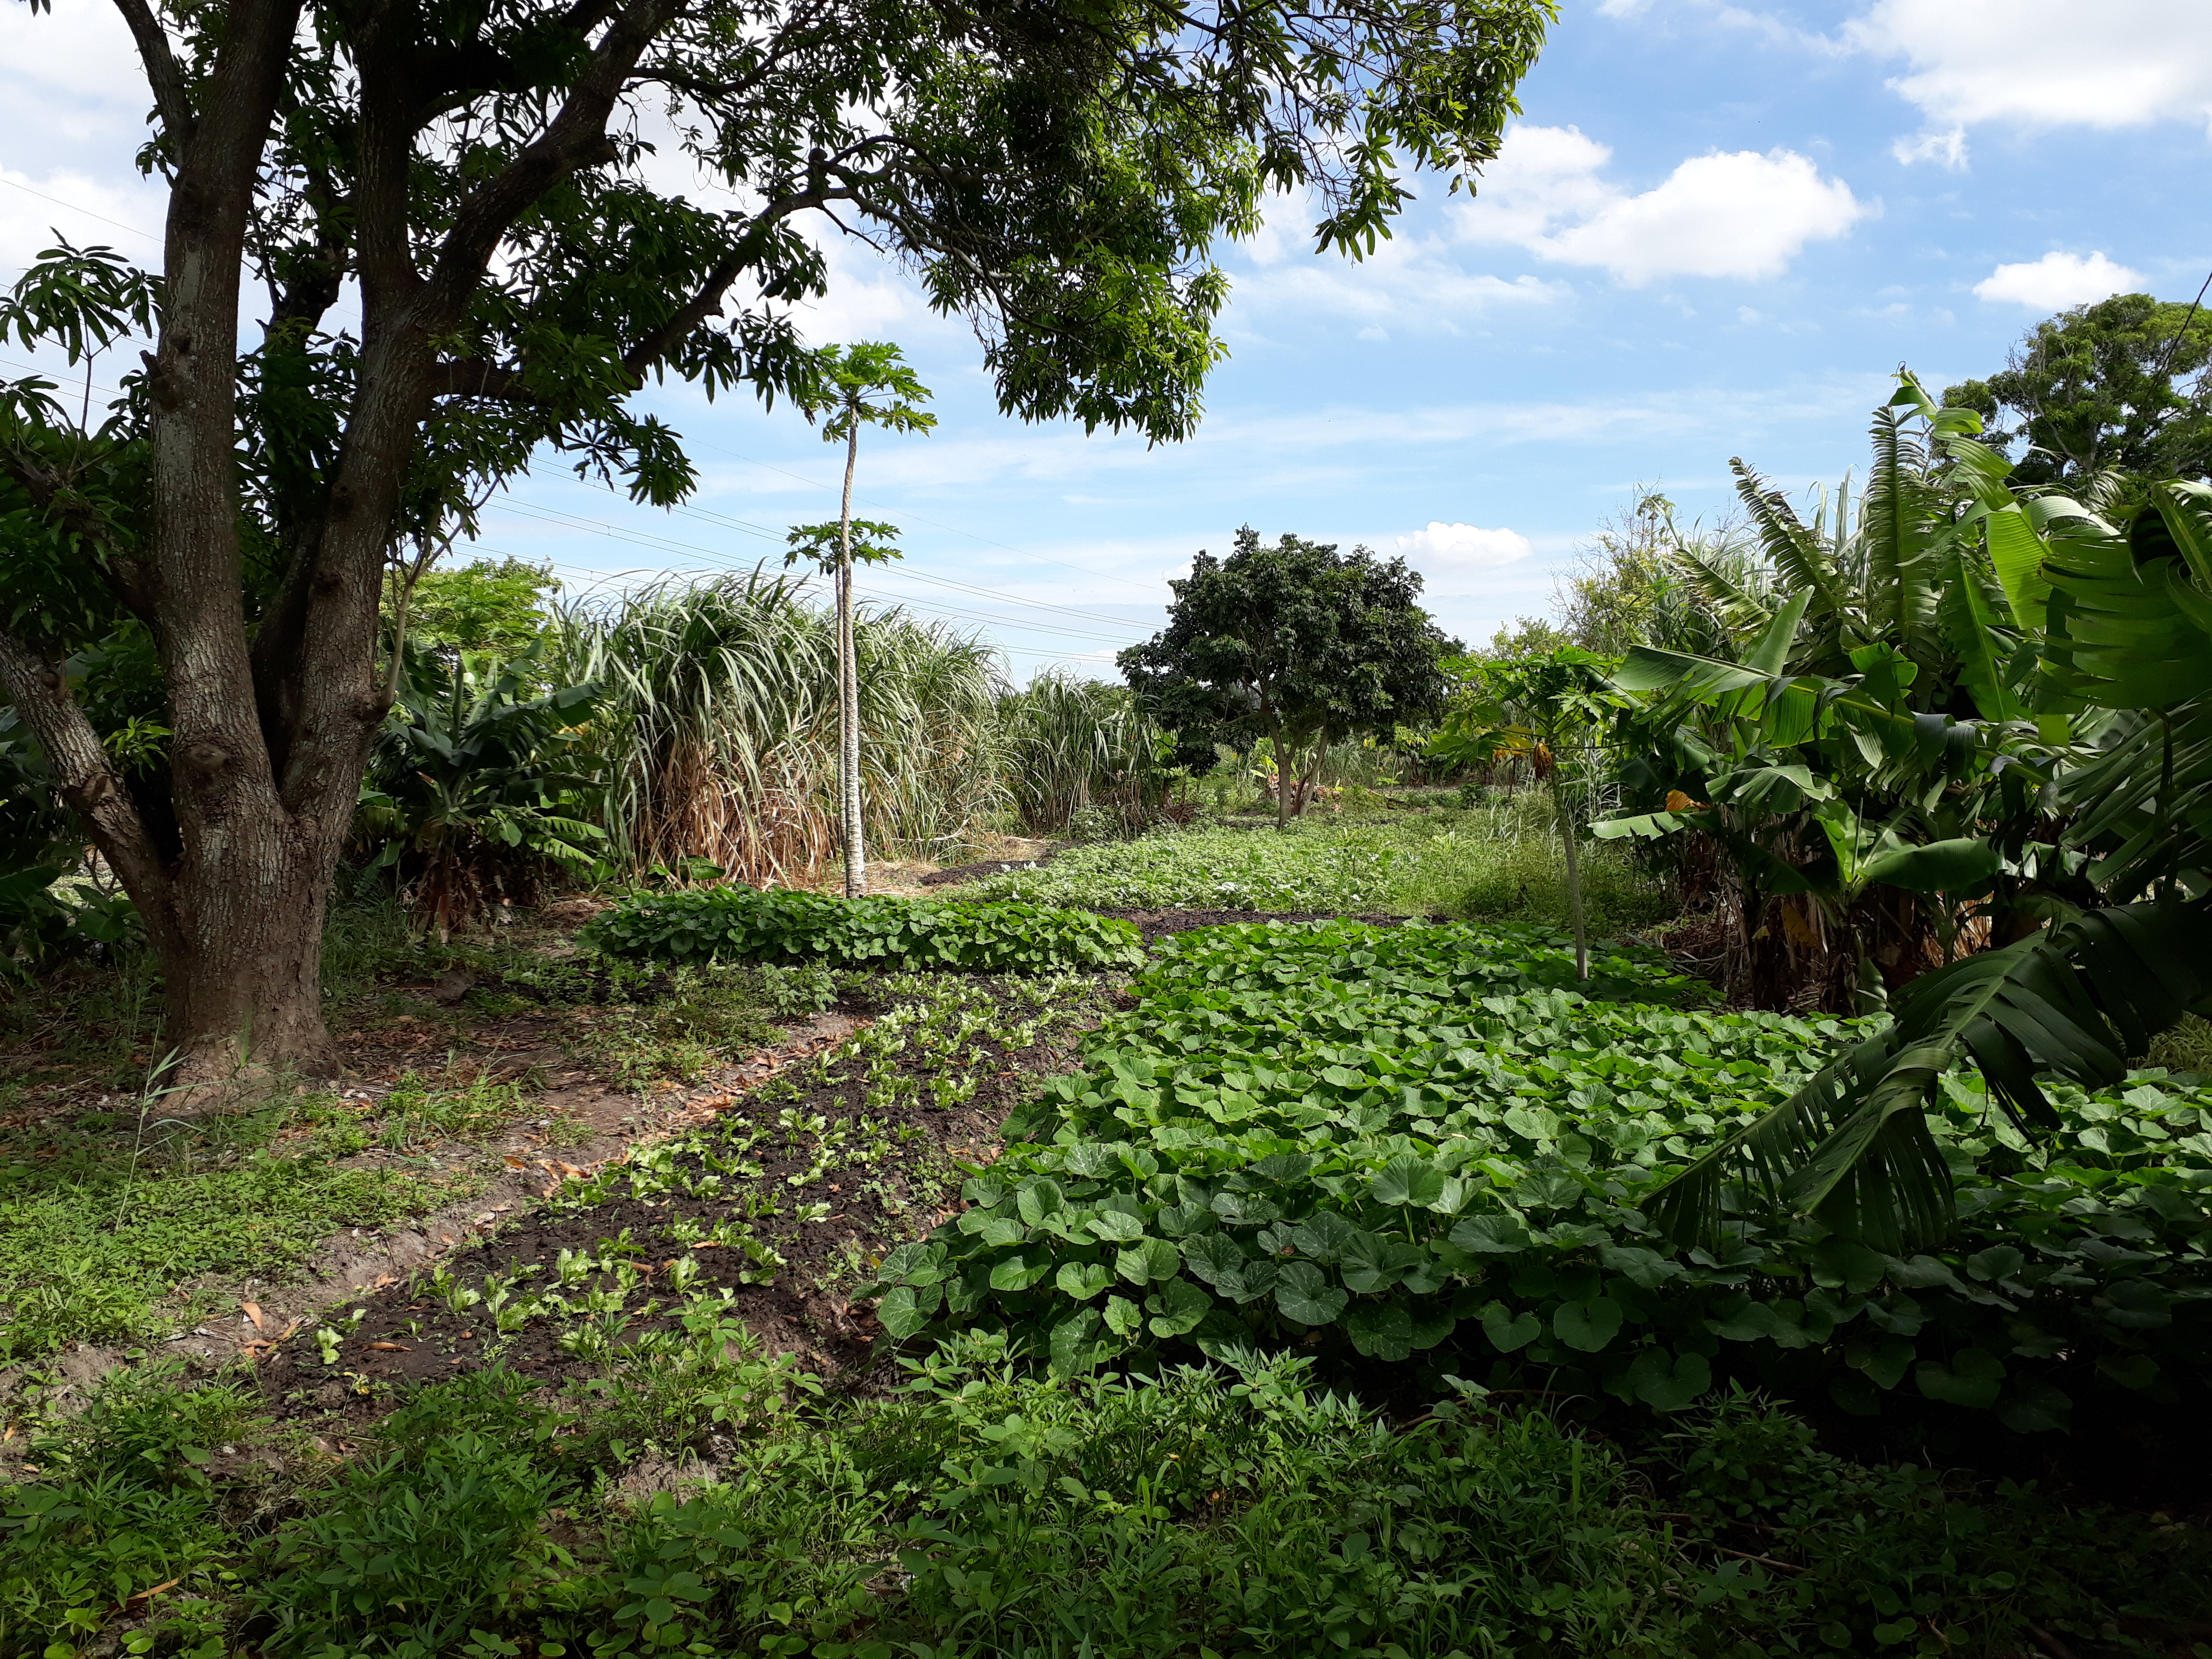 A healthy and productive farming plot in Maputos‘ agricultural green belt